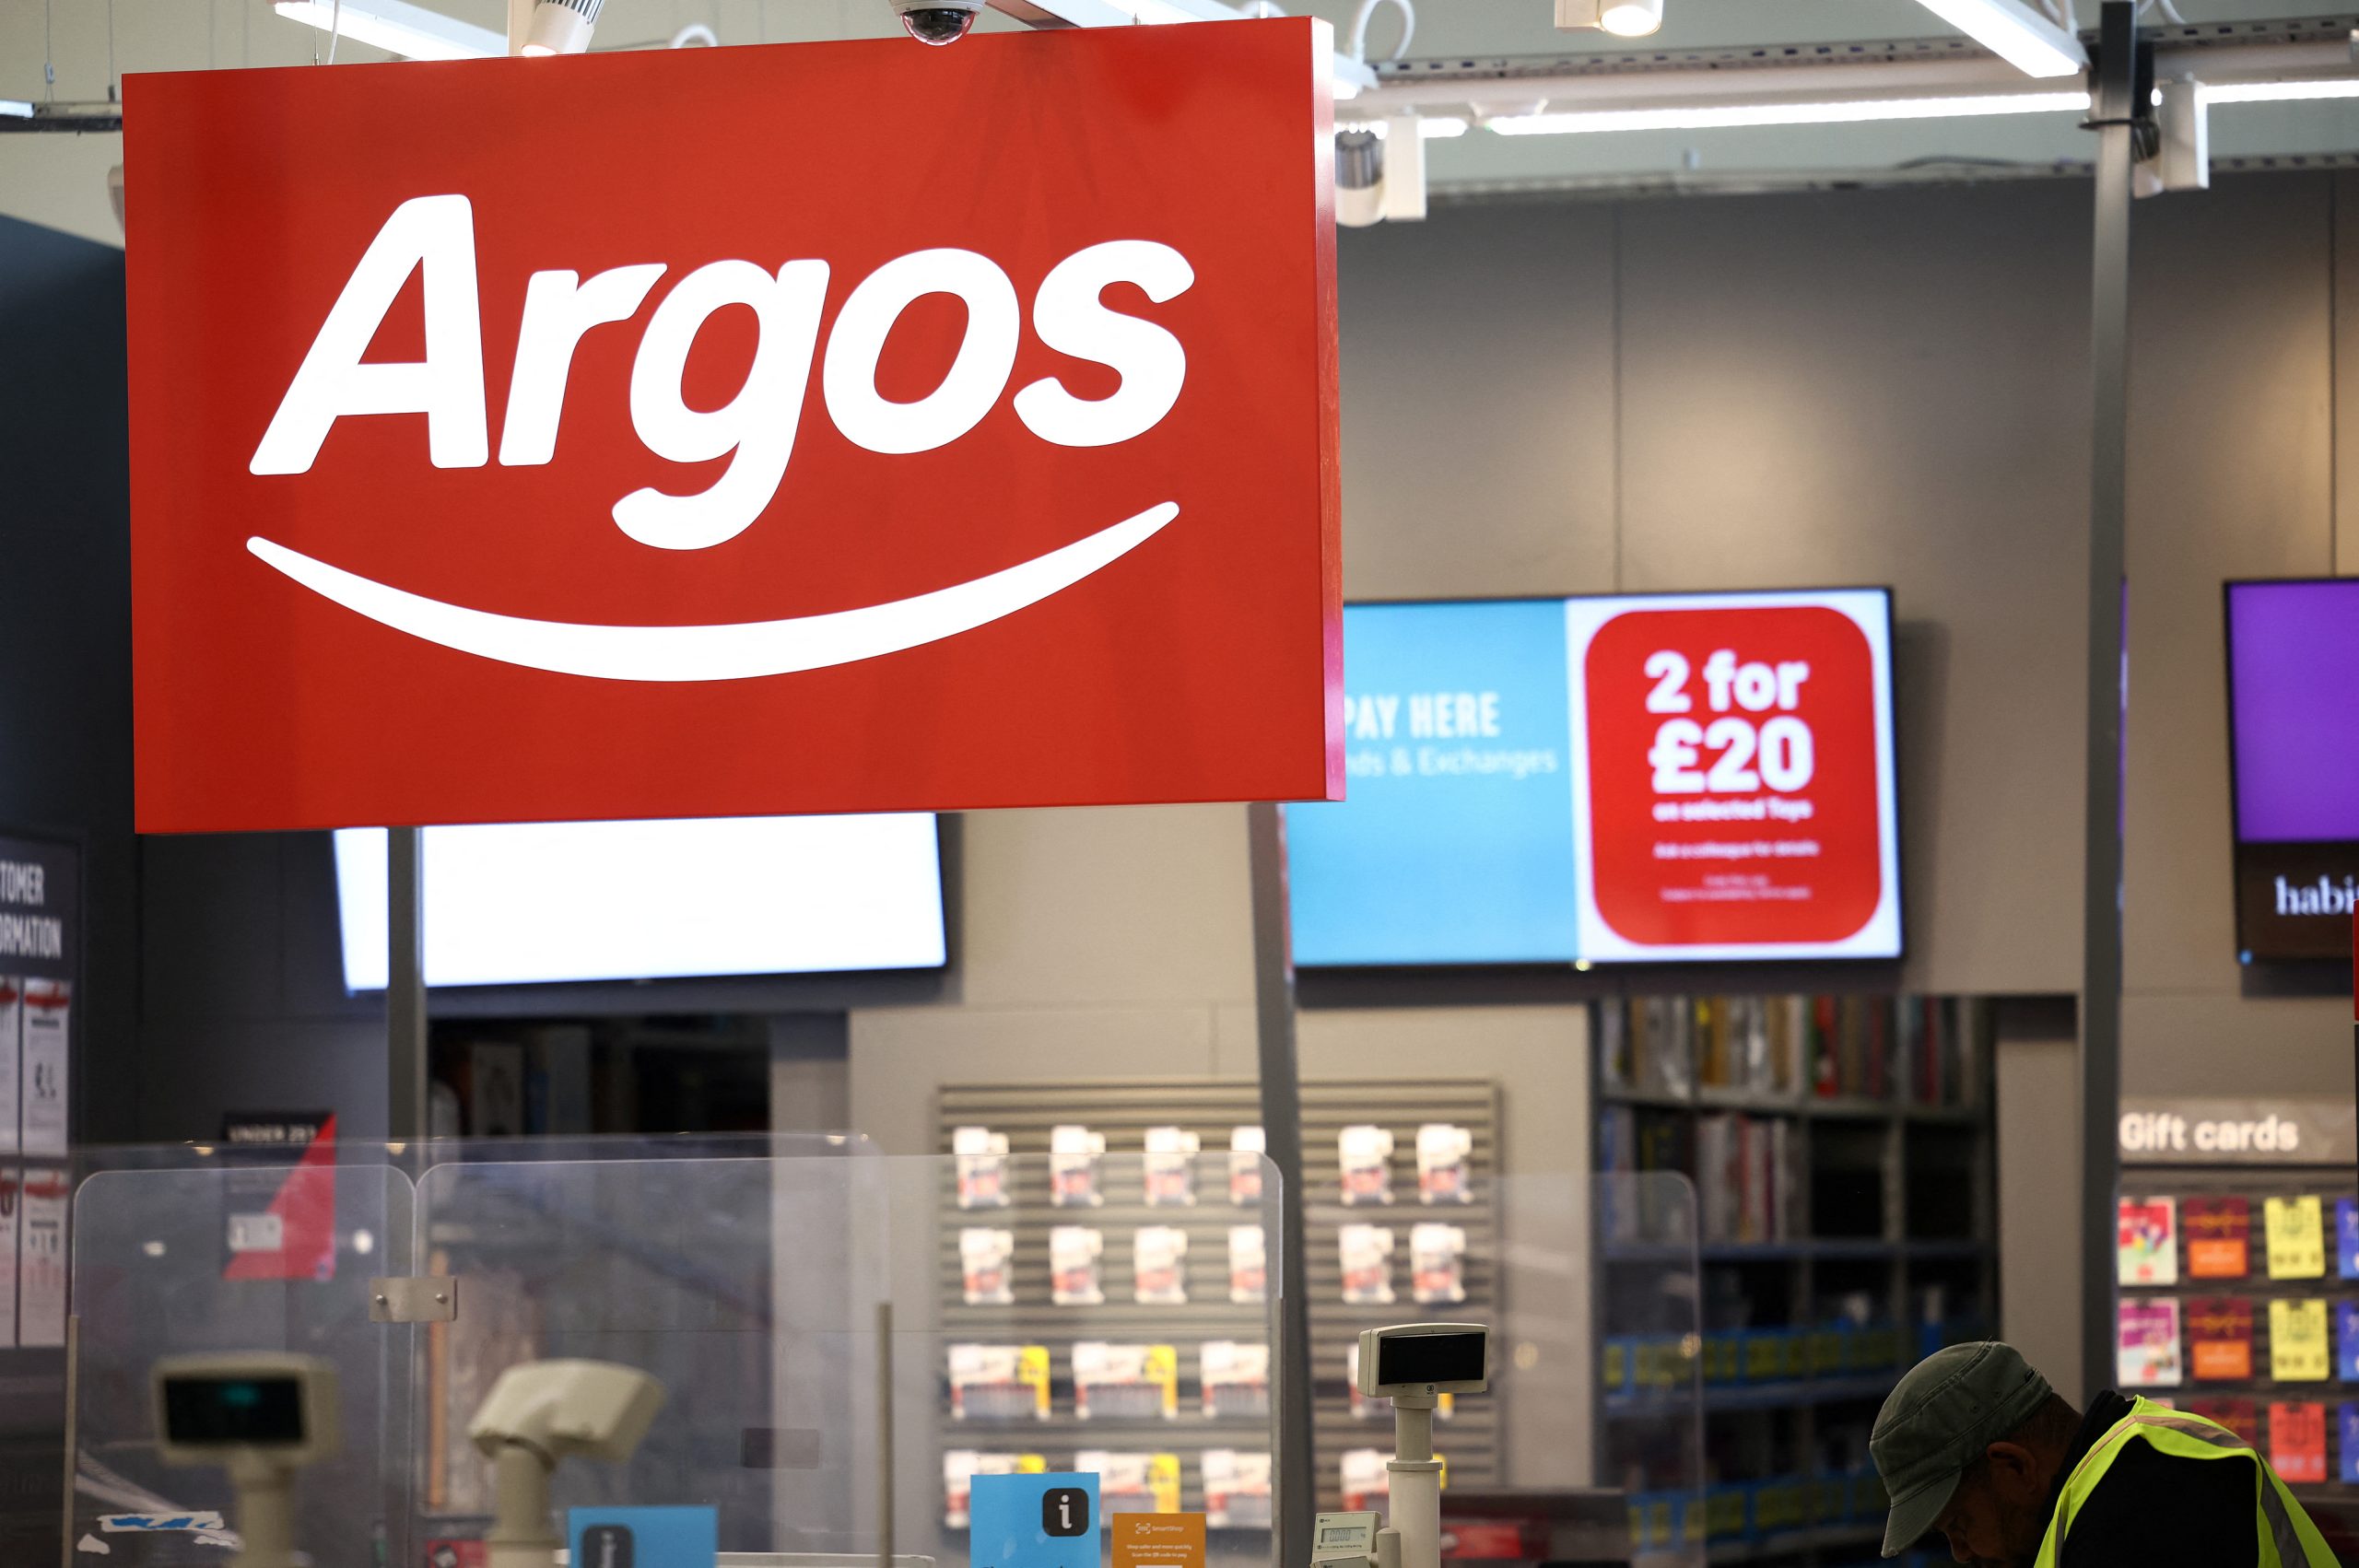 Argos App Not Working: Continue Shopping With Our Help Guide